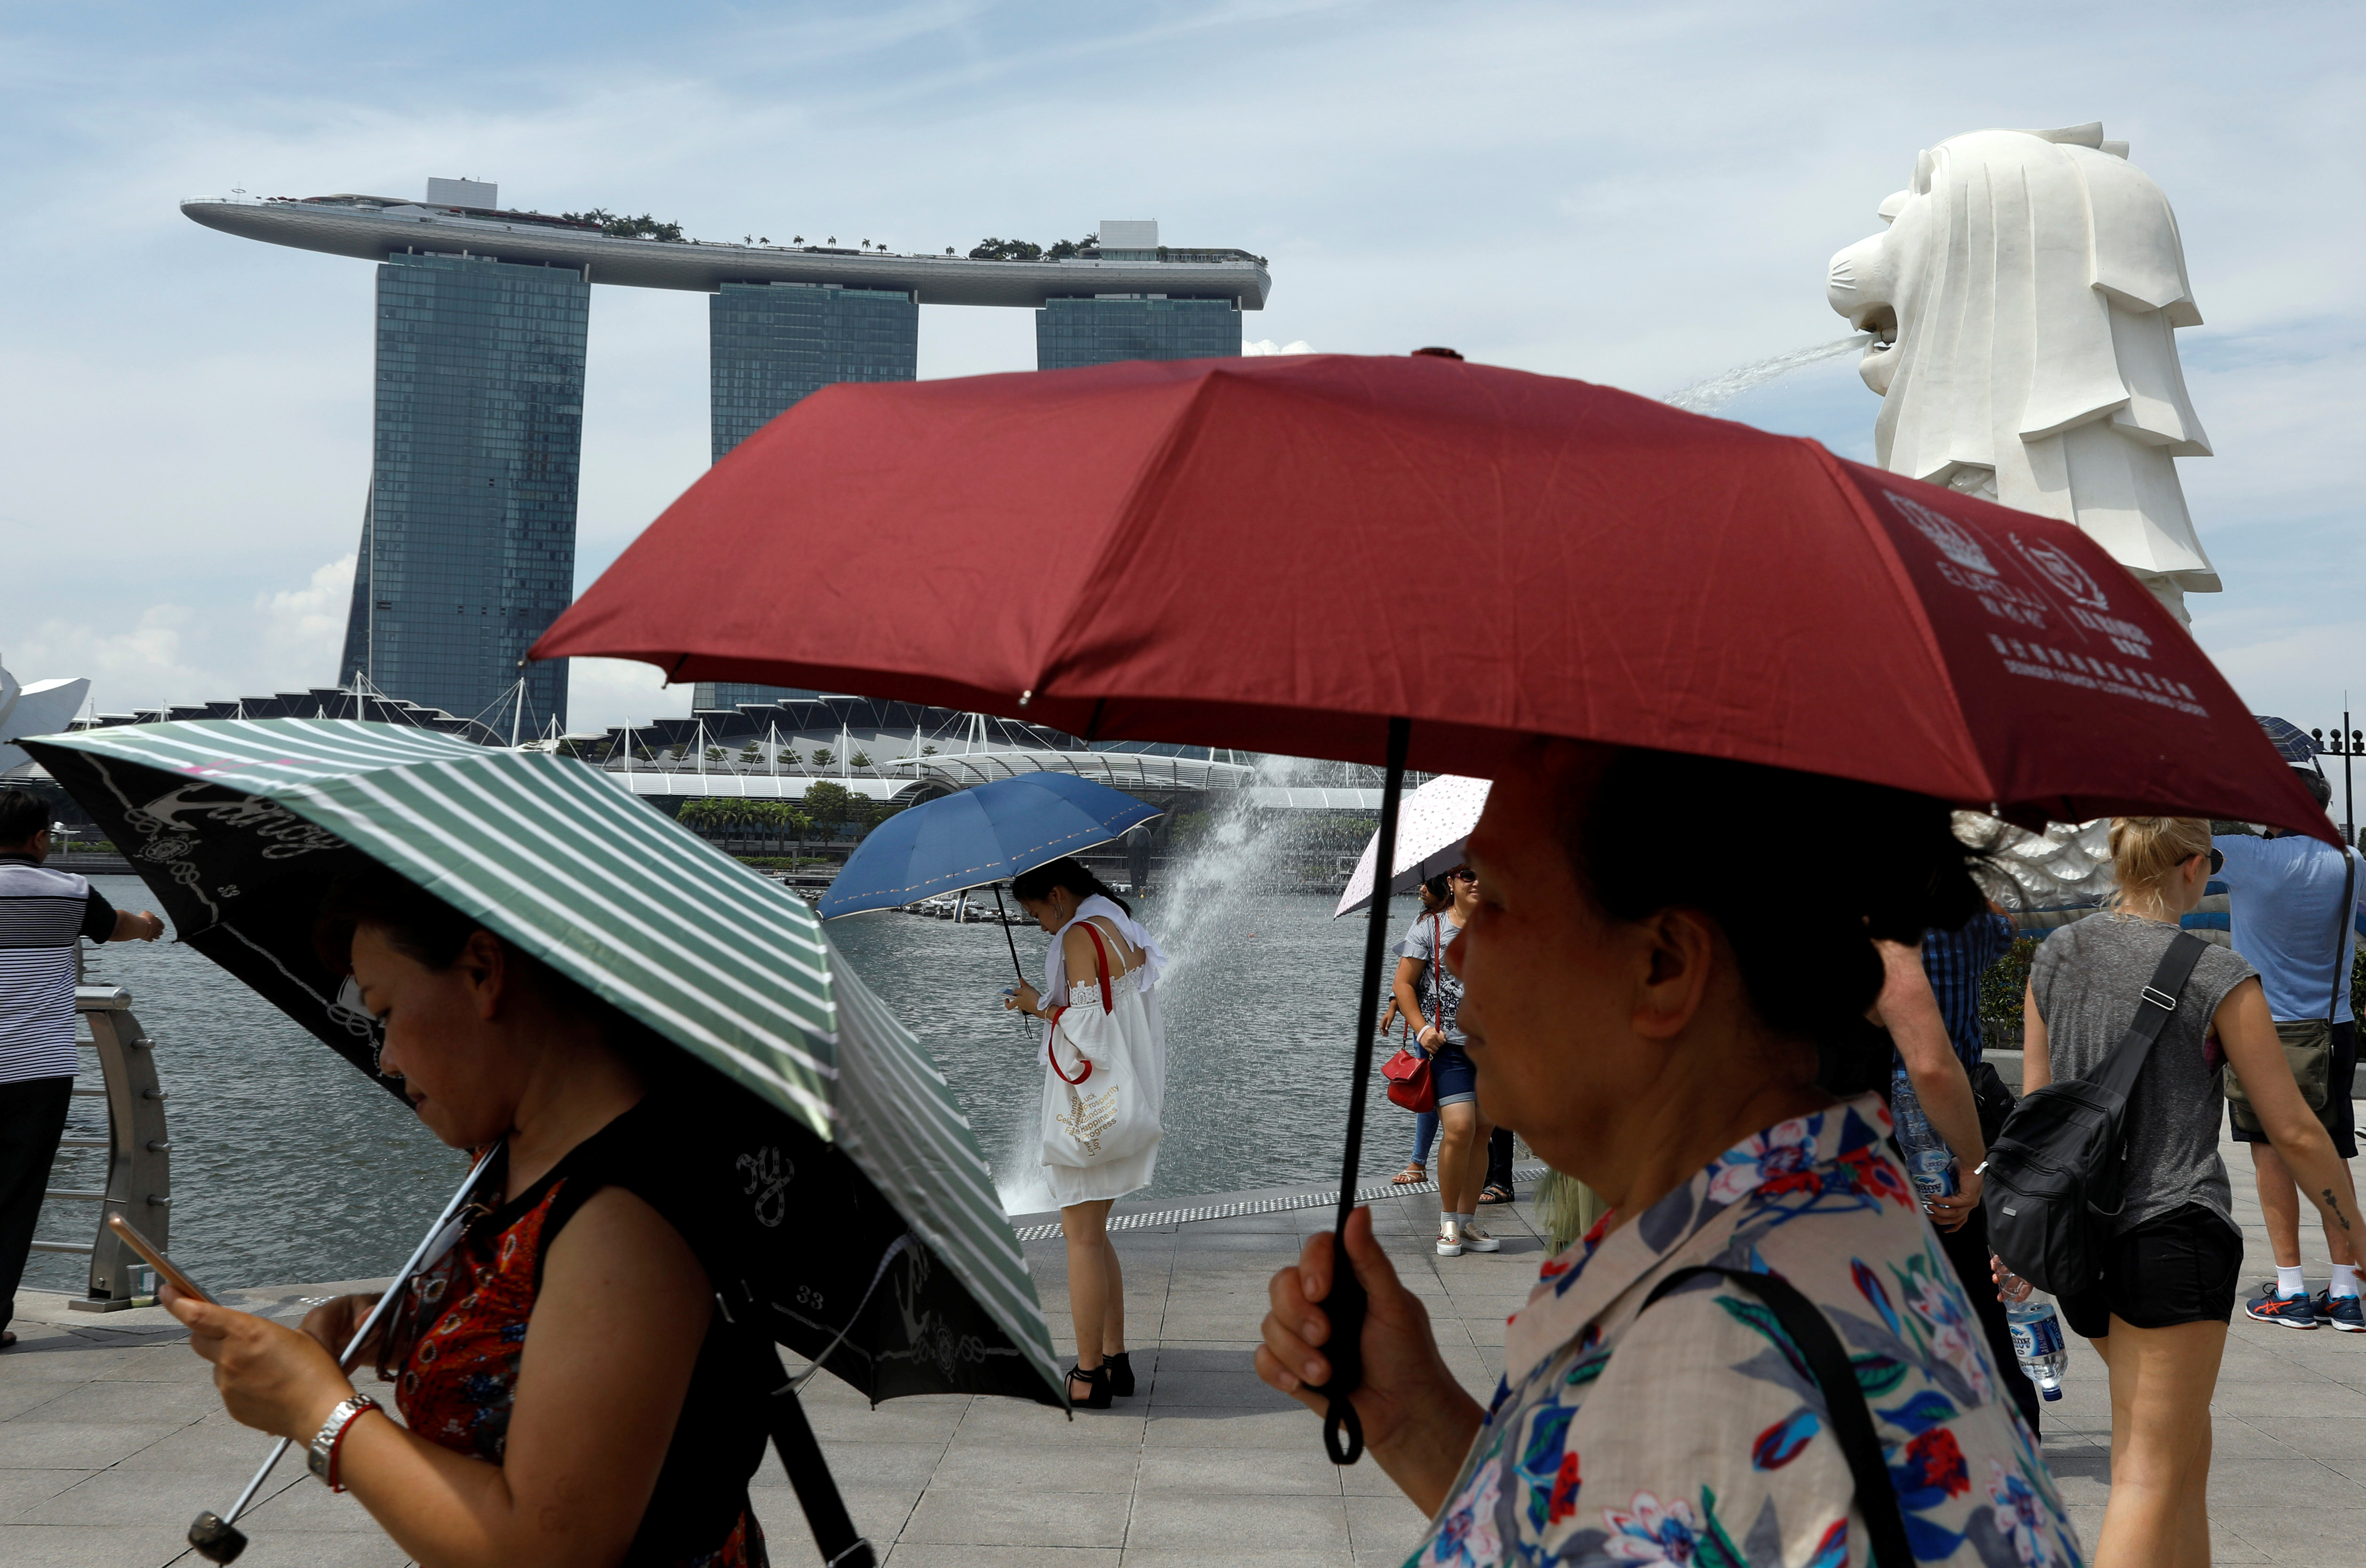 Tourists shield themselves with umbrellas on a hot day at the Merlion Park in Singapore